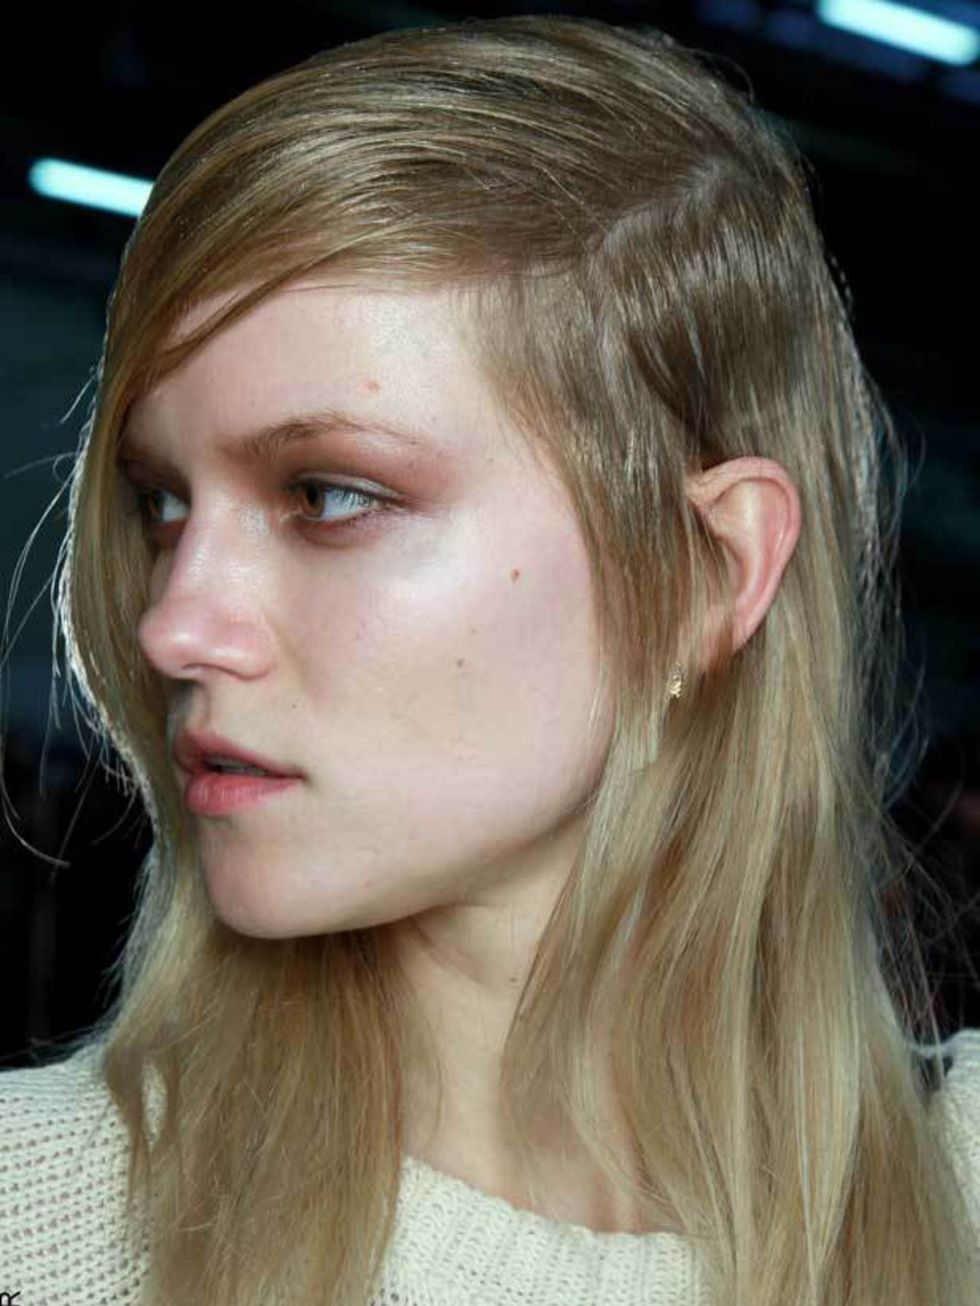 <p>Grunge is back for autumn/winter 2010. Stylists at <a href="http://www.elleuk.com/catwalk/collections/alexander-wang/">Alexander Wang</a> and <a href="http://www.elleuk.com/catwalk/collections/louise-goldin/">Louise Goldin</a> took inspiration from the